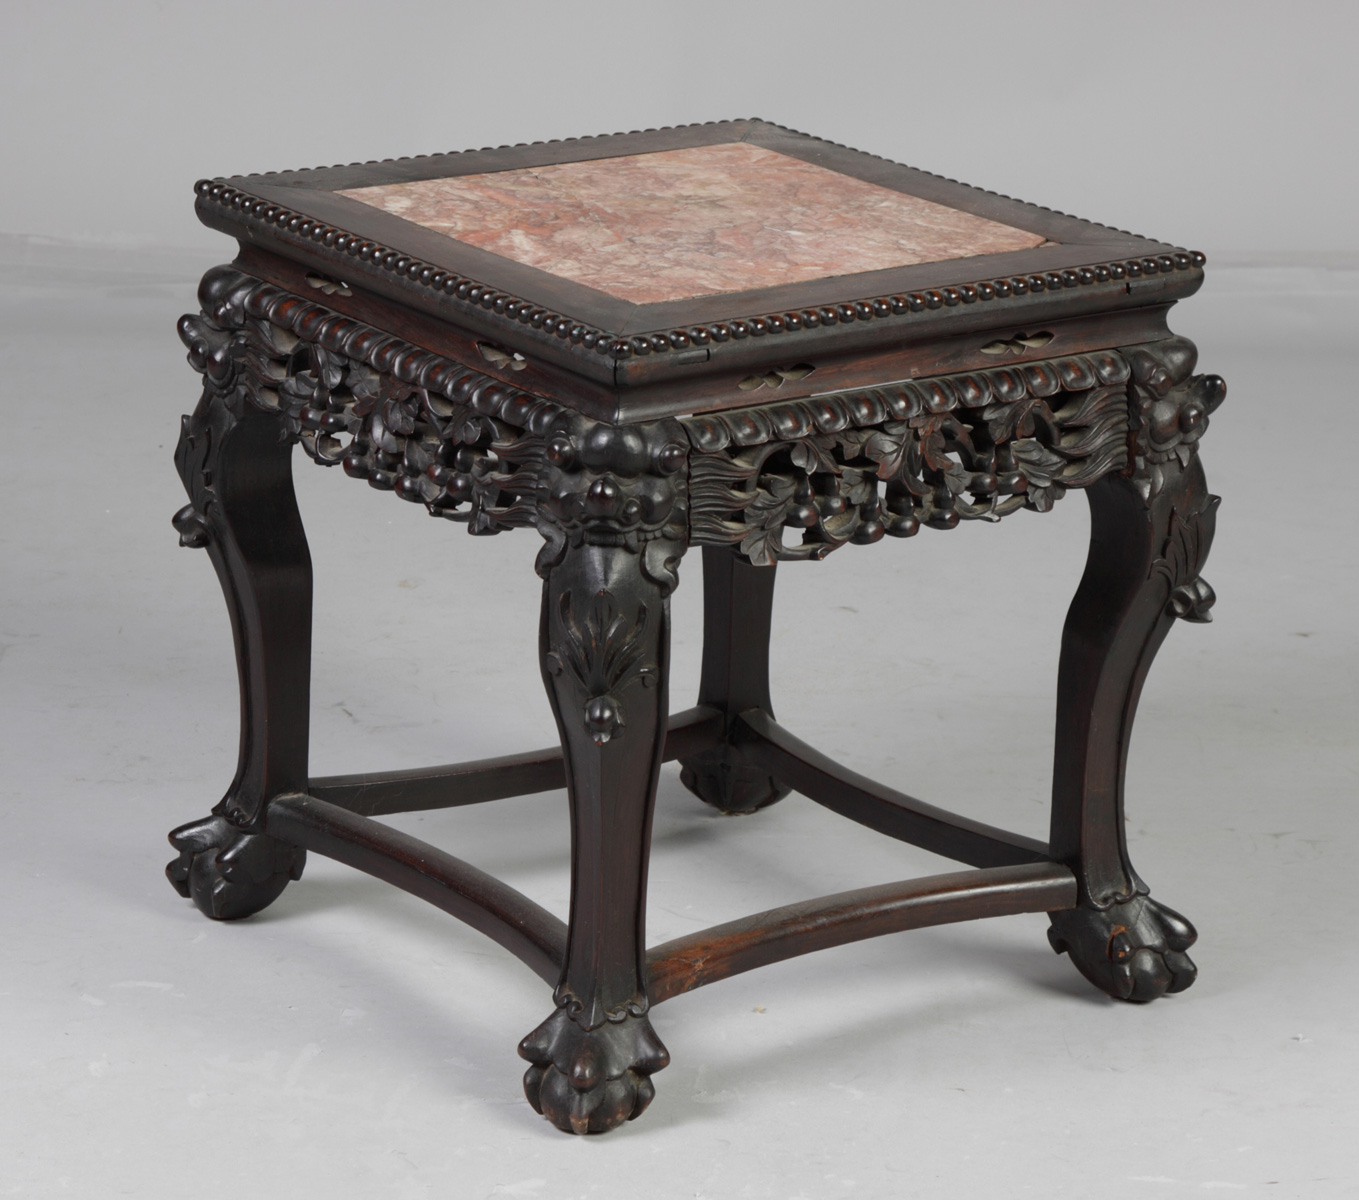 Chinese Carved Hardwood Table with